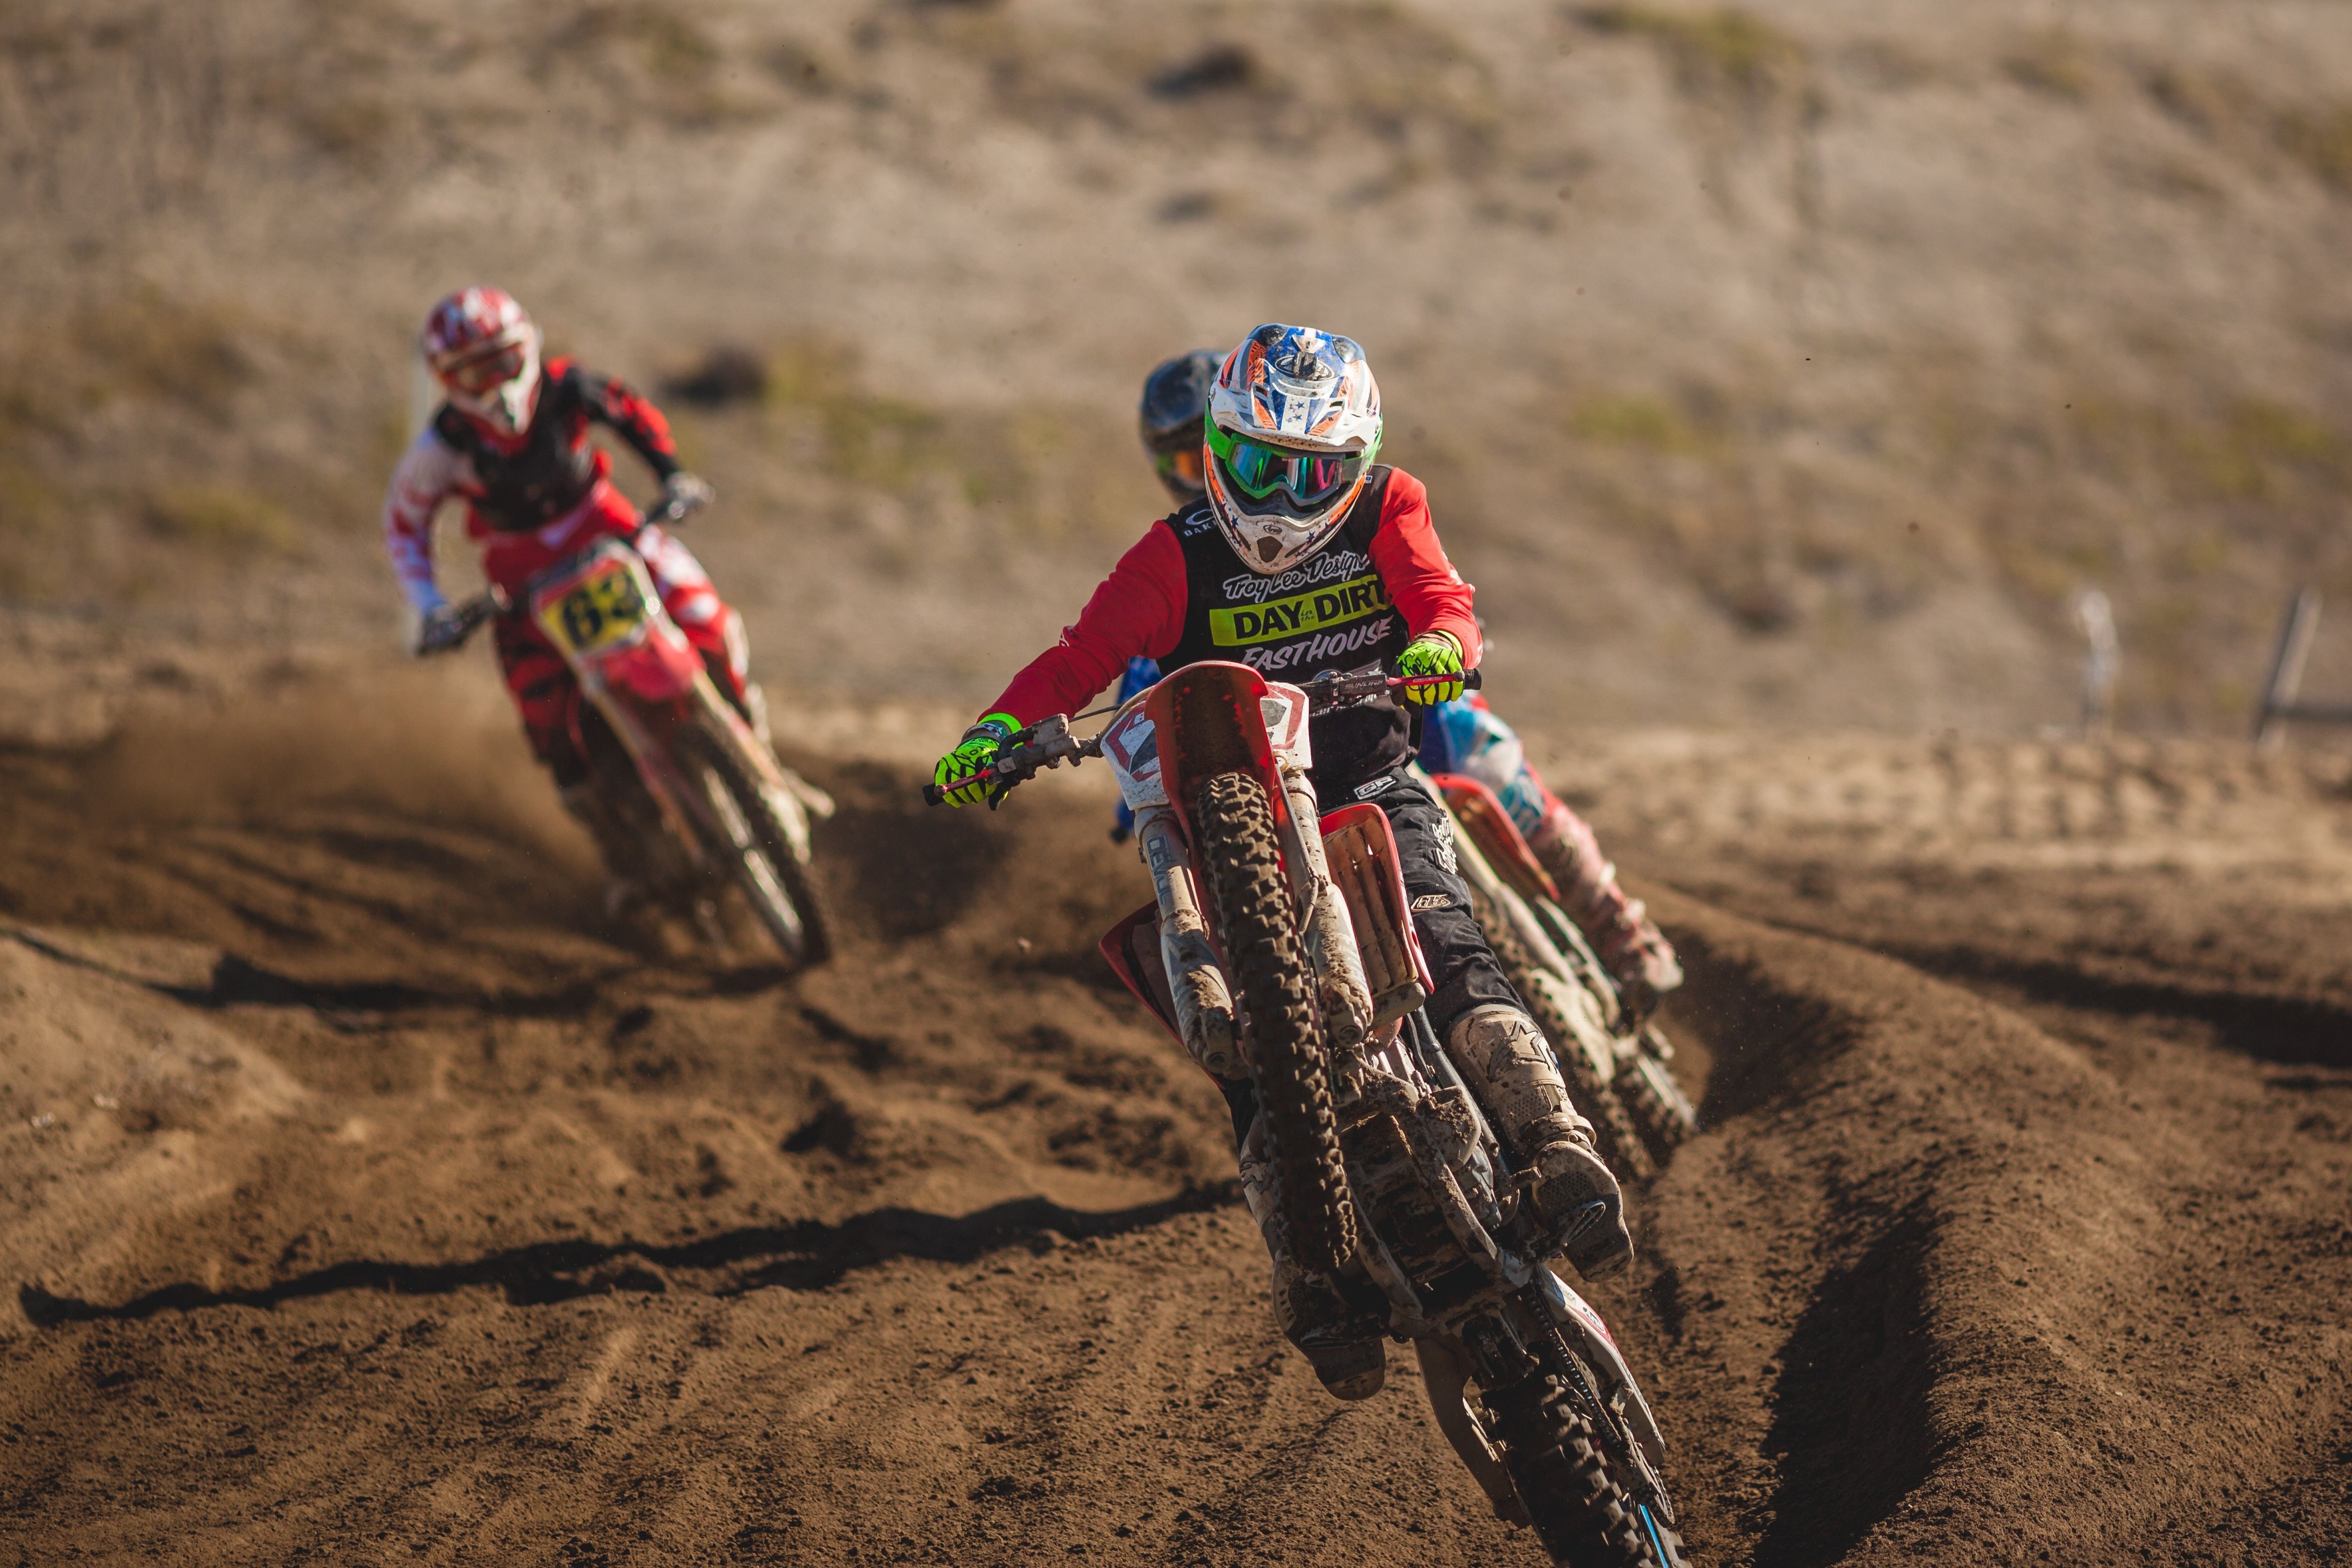 motocross rider doing wheelie on a dirt bike on race track in front of two other motocross racers during daytime free image